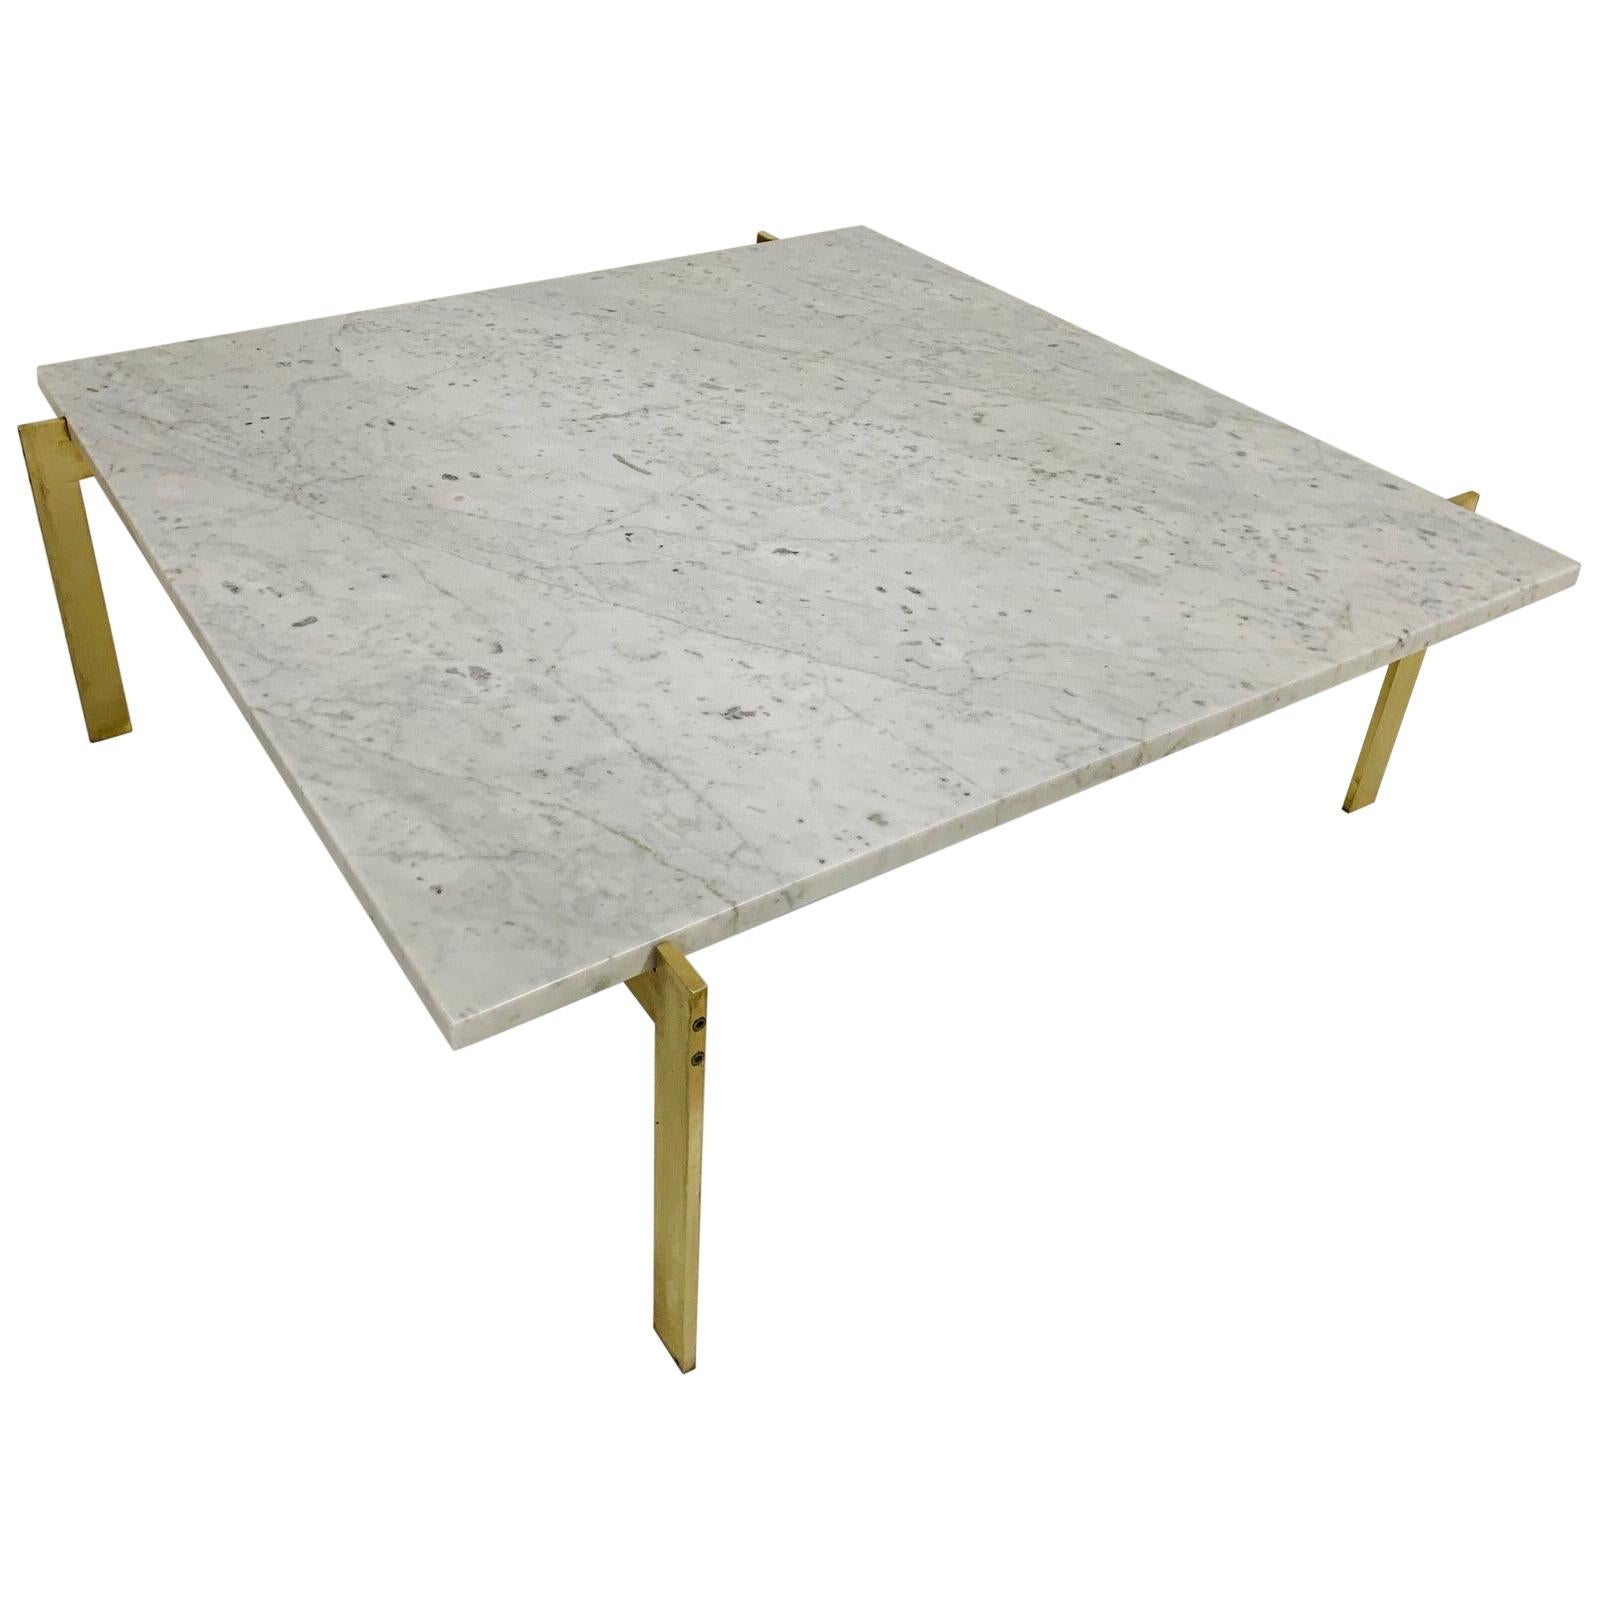 Brass and Carrara Marble-Top Coffee Table Style of Poul Kjaerholm